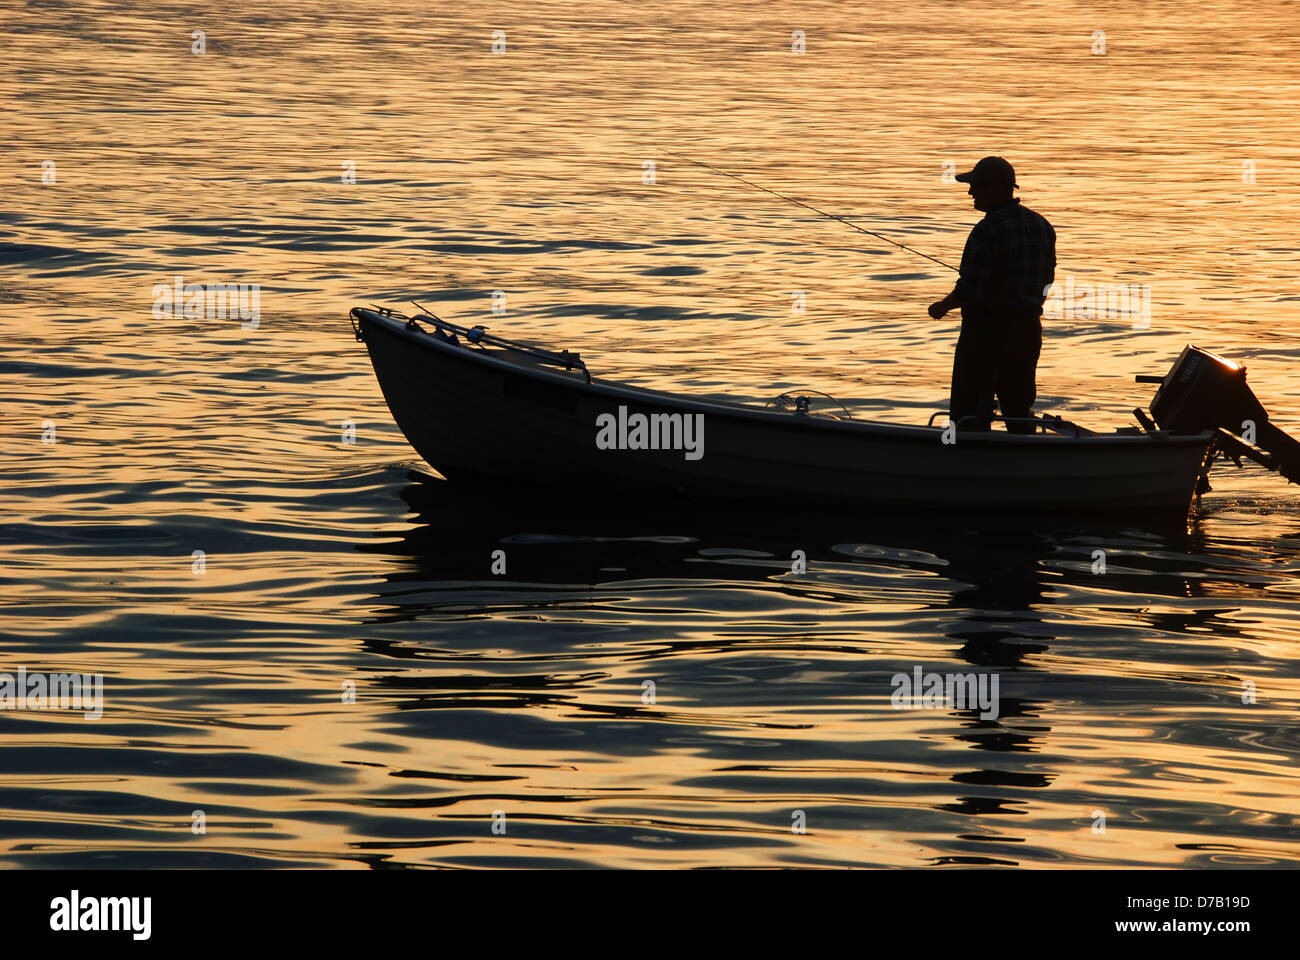 Silhouette of a man fishing from a boat at sunset Stock Photo